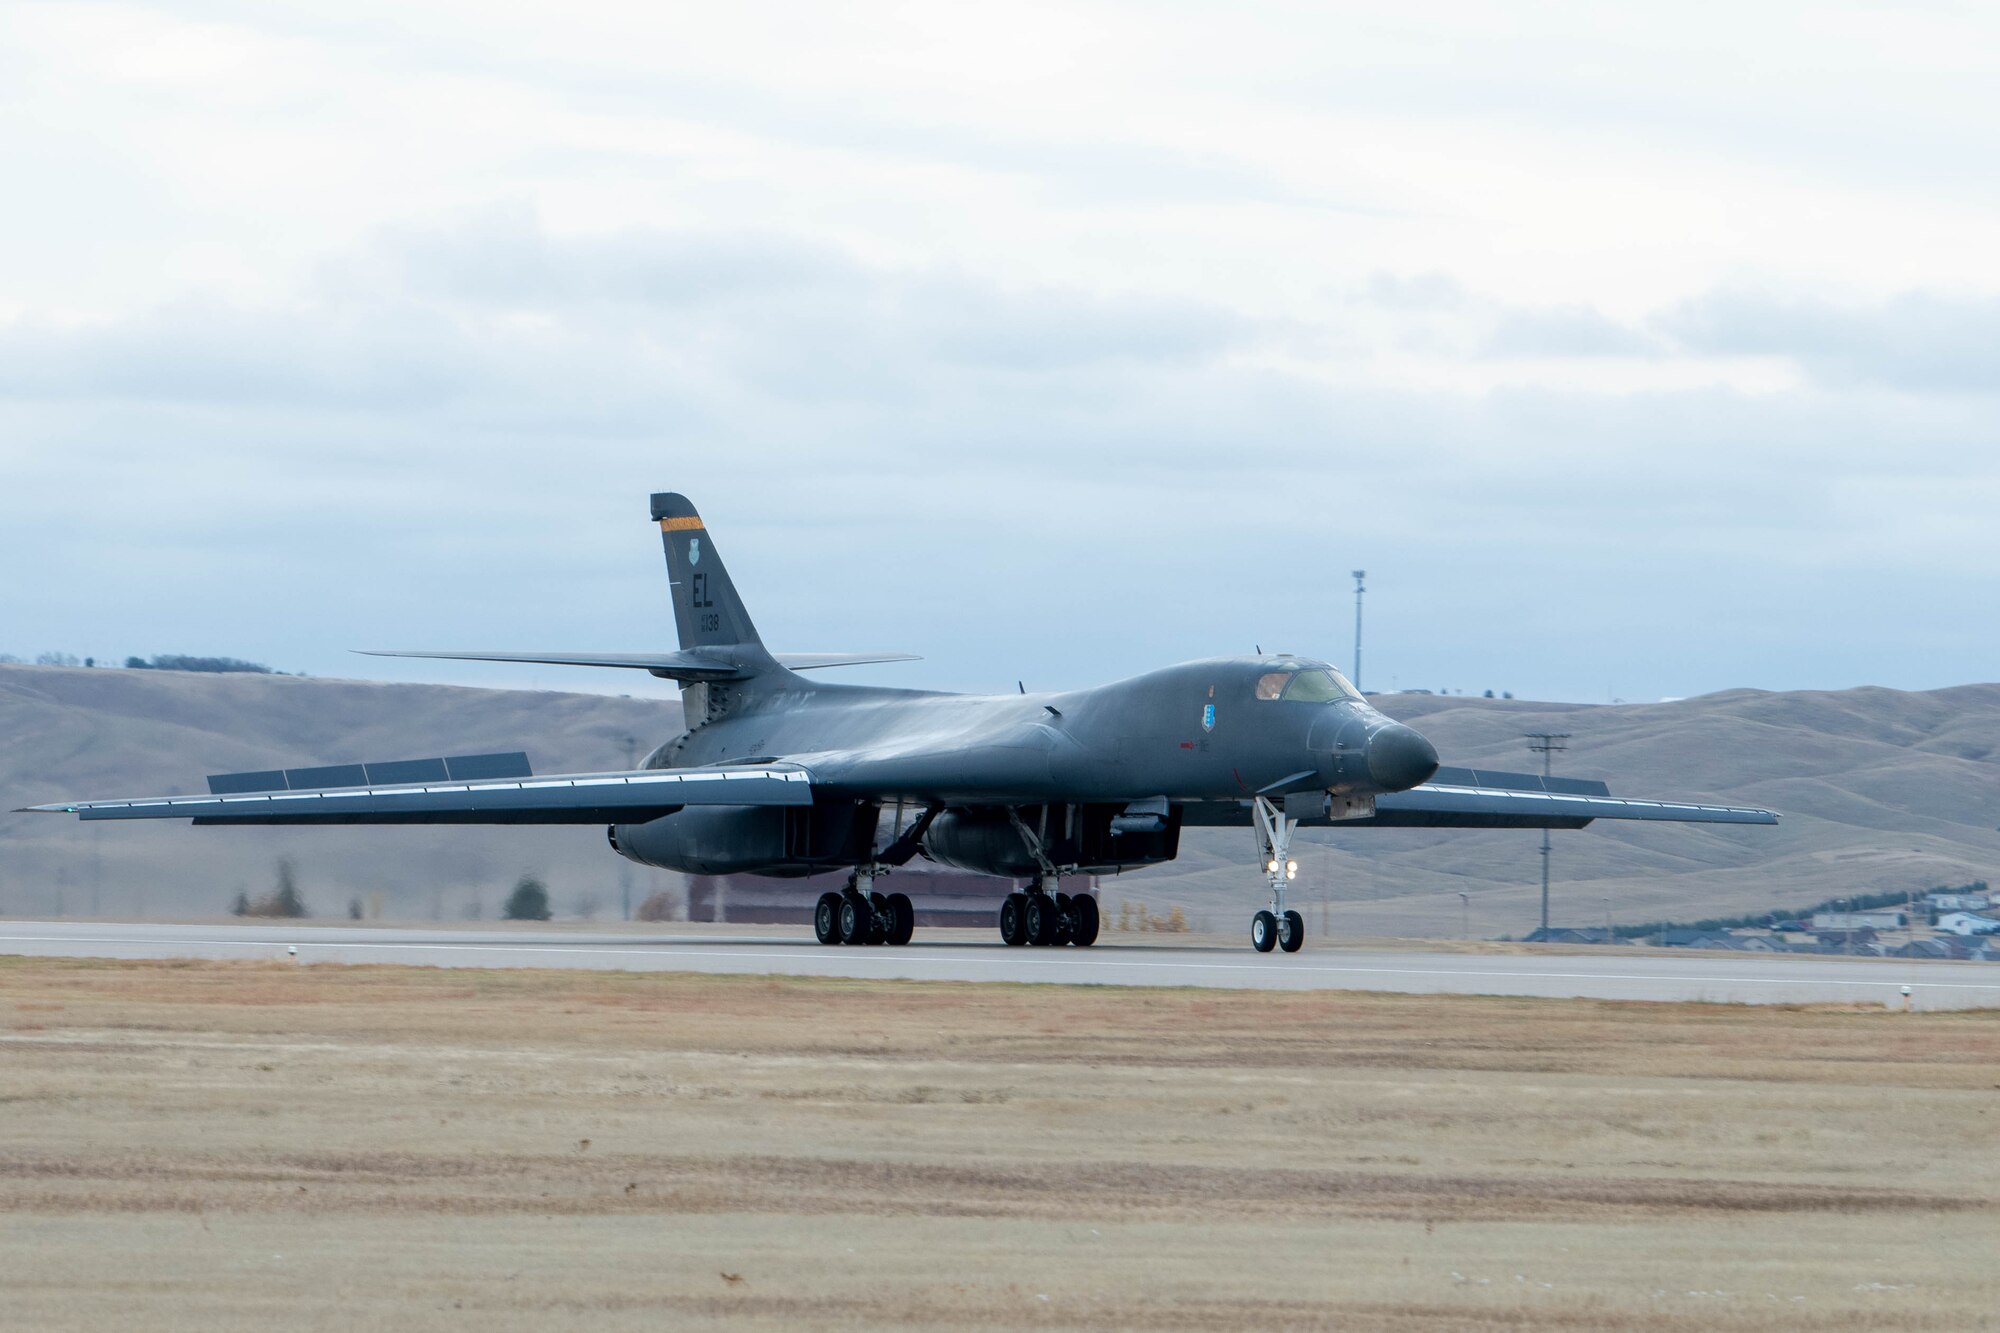 Maj. Gen. Andrew Gebara, 8th Air Force and Joint-Global Strike Operations Center commander, lands a B-1B Lancer on the runway at Ellsworth Air Force Base, S.D., Oct. 26, 2021. Gebara is a command pilot with more than 3,800 flight hours, including 46 combat sorties in the A-10 Thunderbolt and B-2 Spirit in support of operations Iraqi Freedom I, Allied Force and Joint Guard as well as providing ground and air support during Operation Enduring Freedom. (U.S. Air Force photo by Airman 1st Class Quentin Marx)